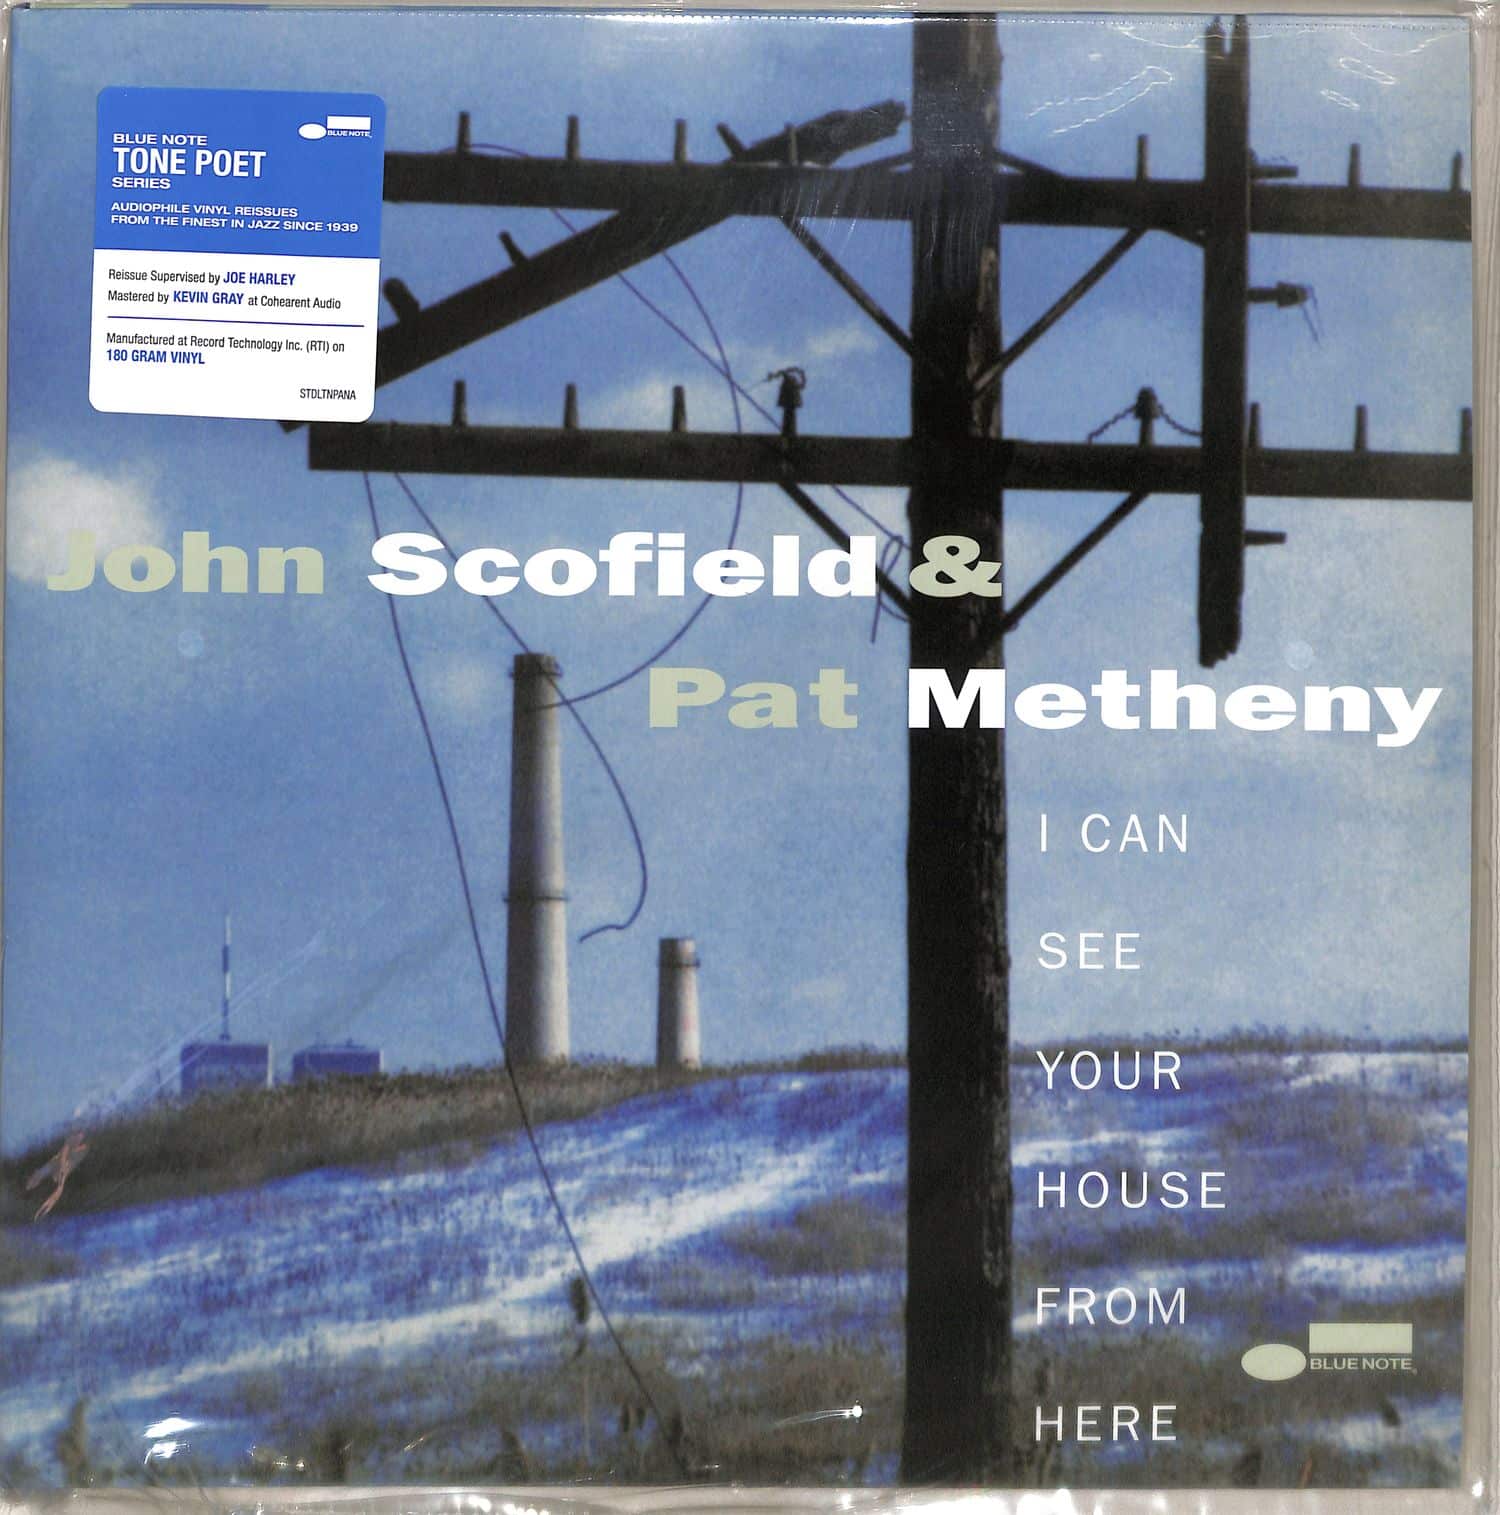 John Scofield & Pat Metheny - I CAN SEE YOUR HOUSE FROM HERE 